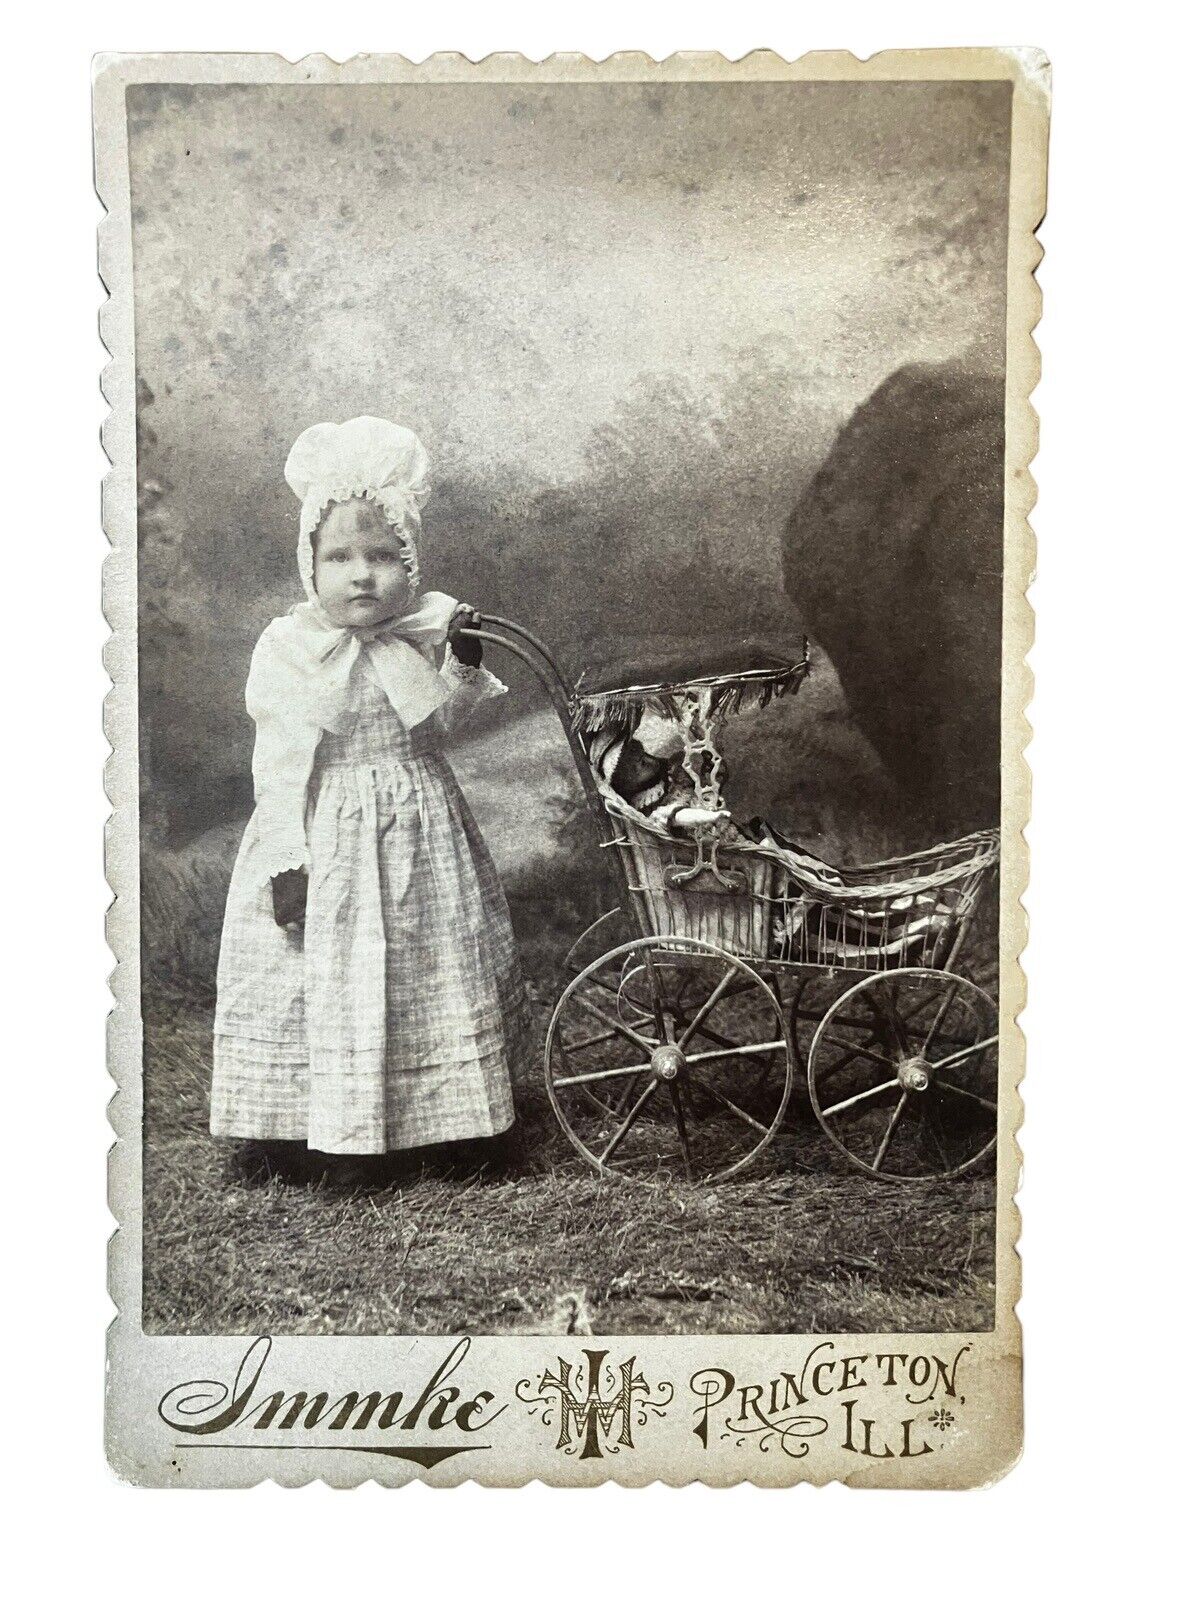 Antique Cabinet Card Photograph Girl With Her Doll ID Princeton ILL 1891 IMMKE